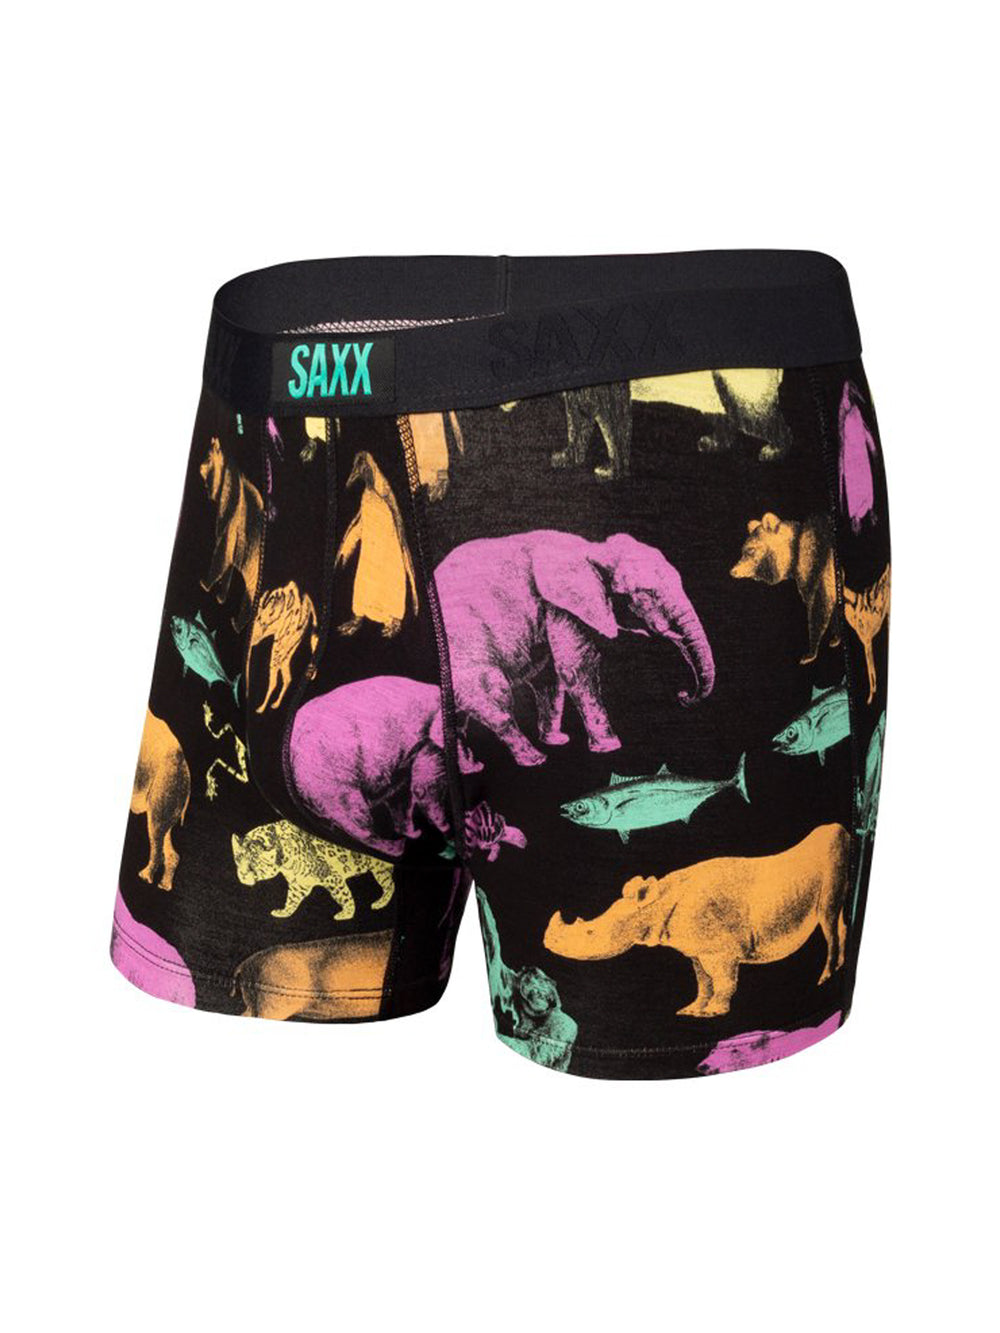 SAXX VIBE BOXER BRIEFING - BLACK ENDANGERED - CLEARANCE